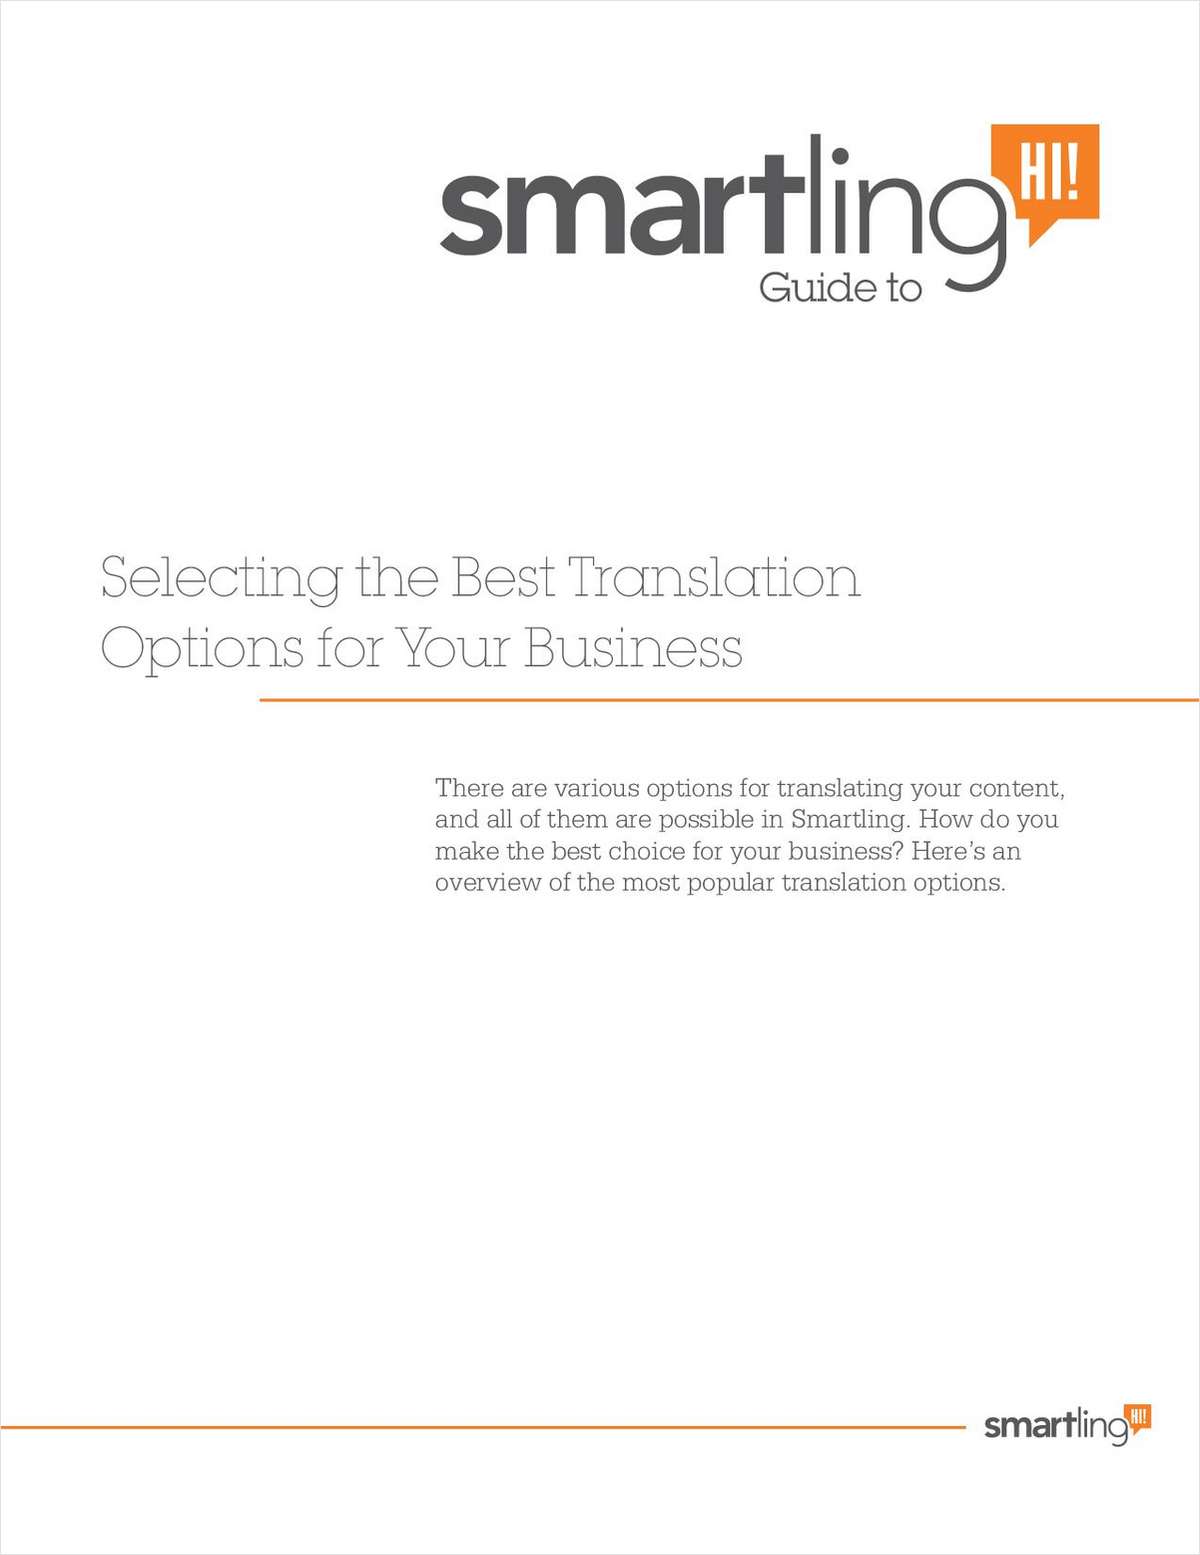 Selecting the Best Translation Options for Your Business